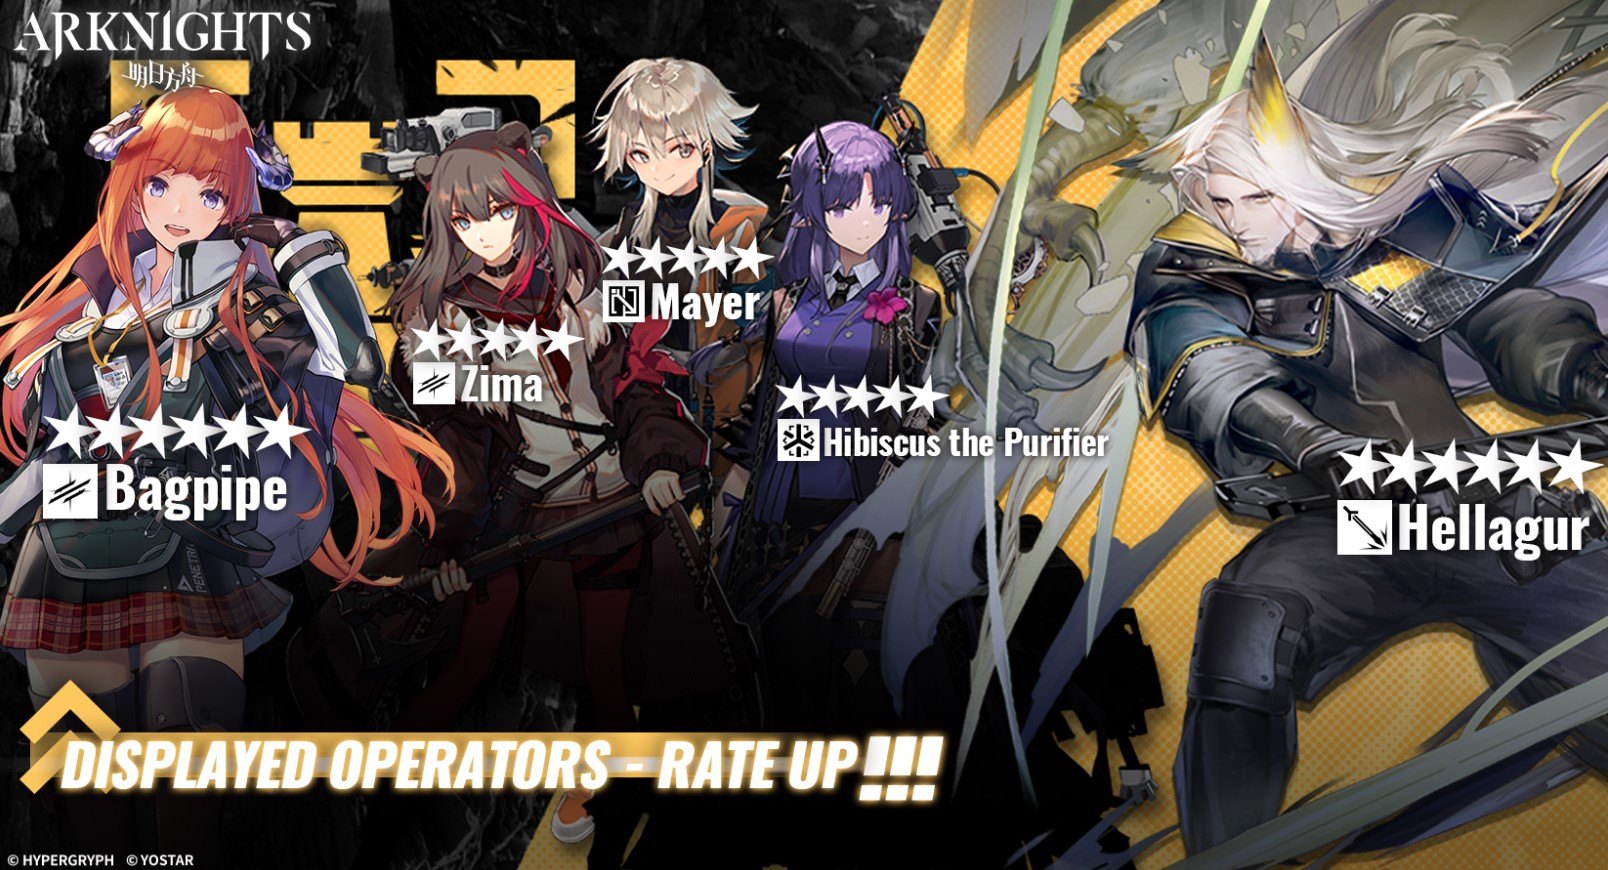 Arknights – Operators Hellagur, Bagpipe, Zima, Mayer, and Hibiscus the Purifier Featured in Standard Banner #92